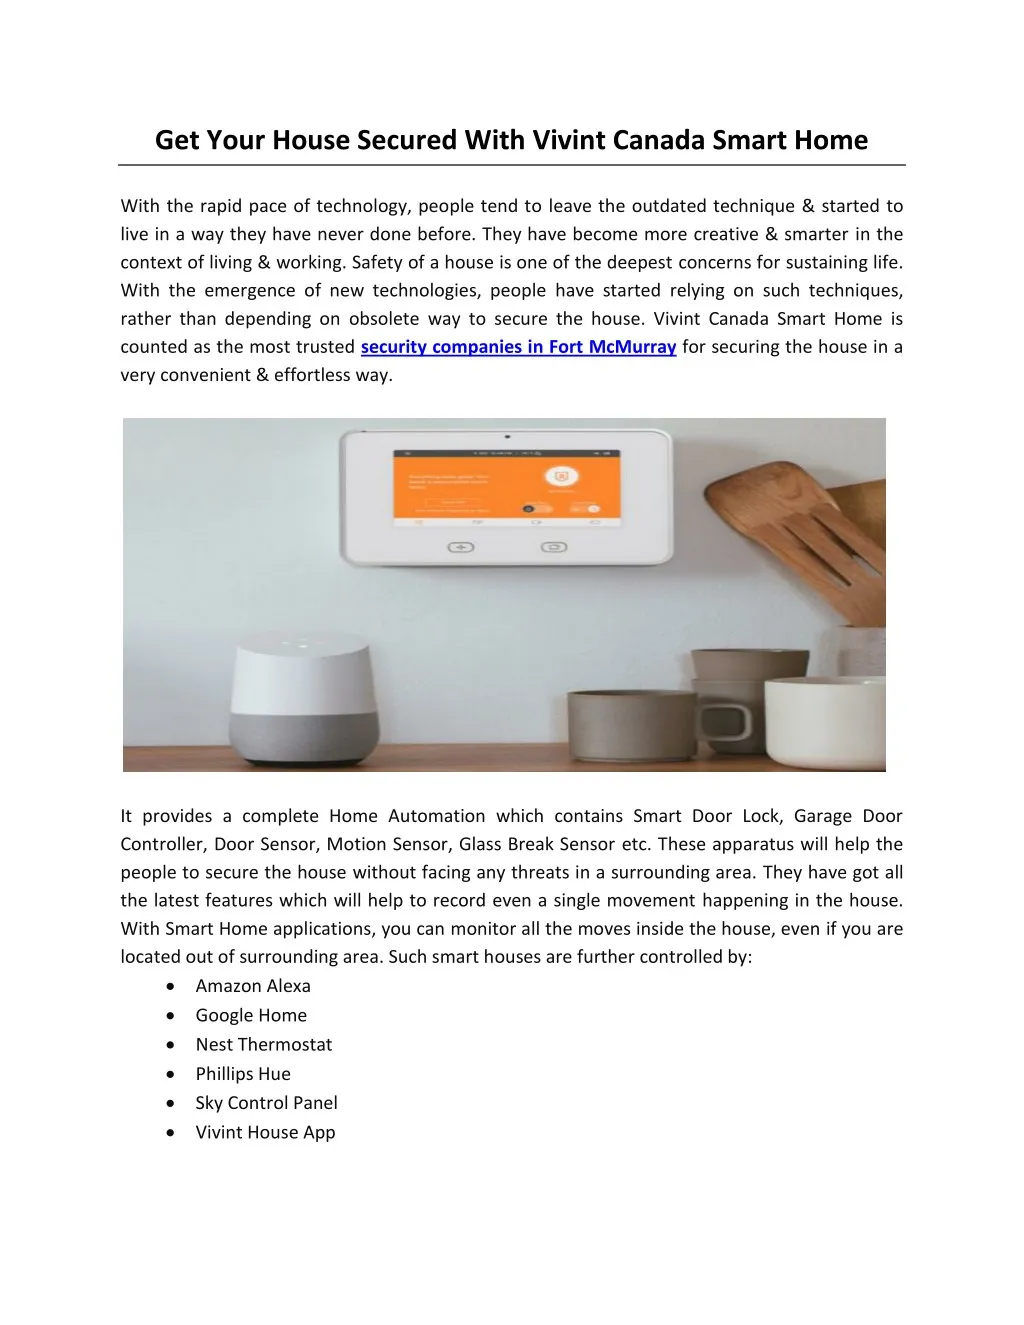 get your house secured with vivint canada smart